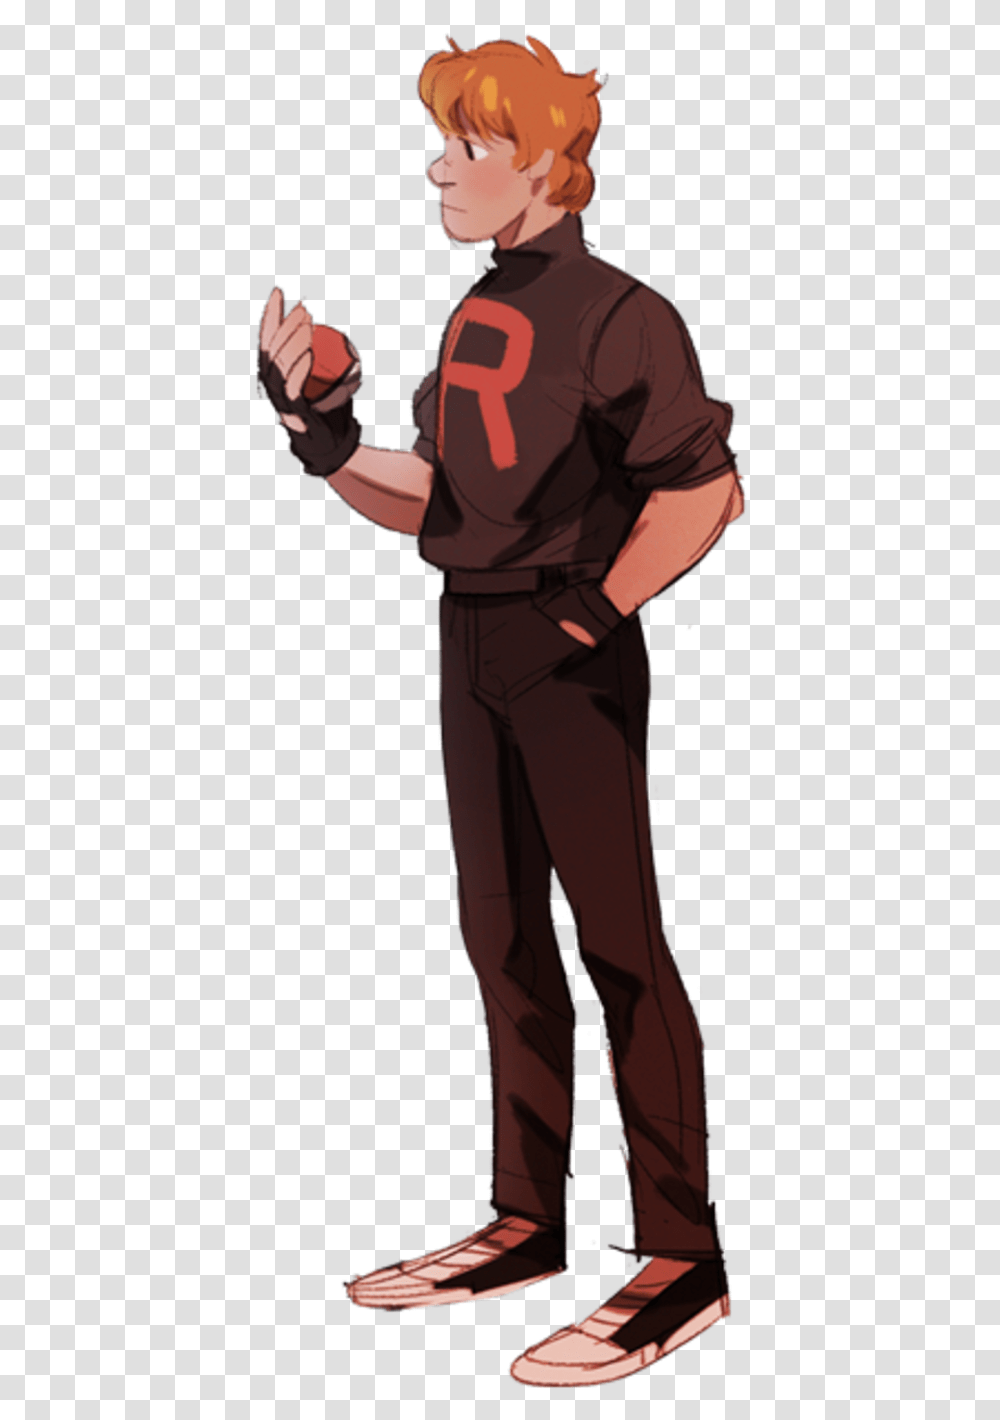 Standing Man Fictional Character Cartoon Male Joint Male Team Rocket Oc, Person, Female, Suit Transparent Png